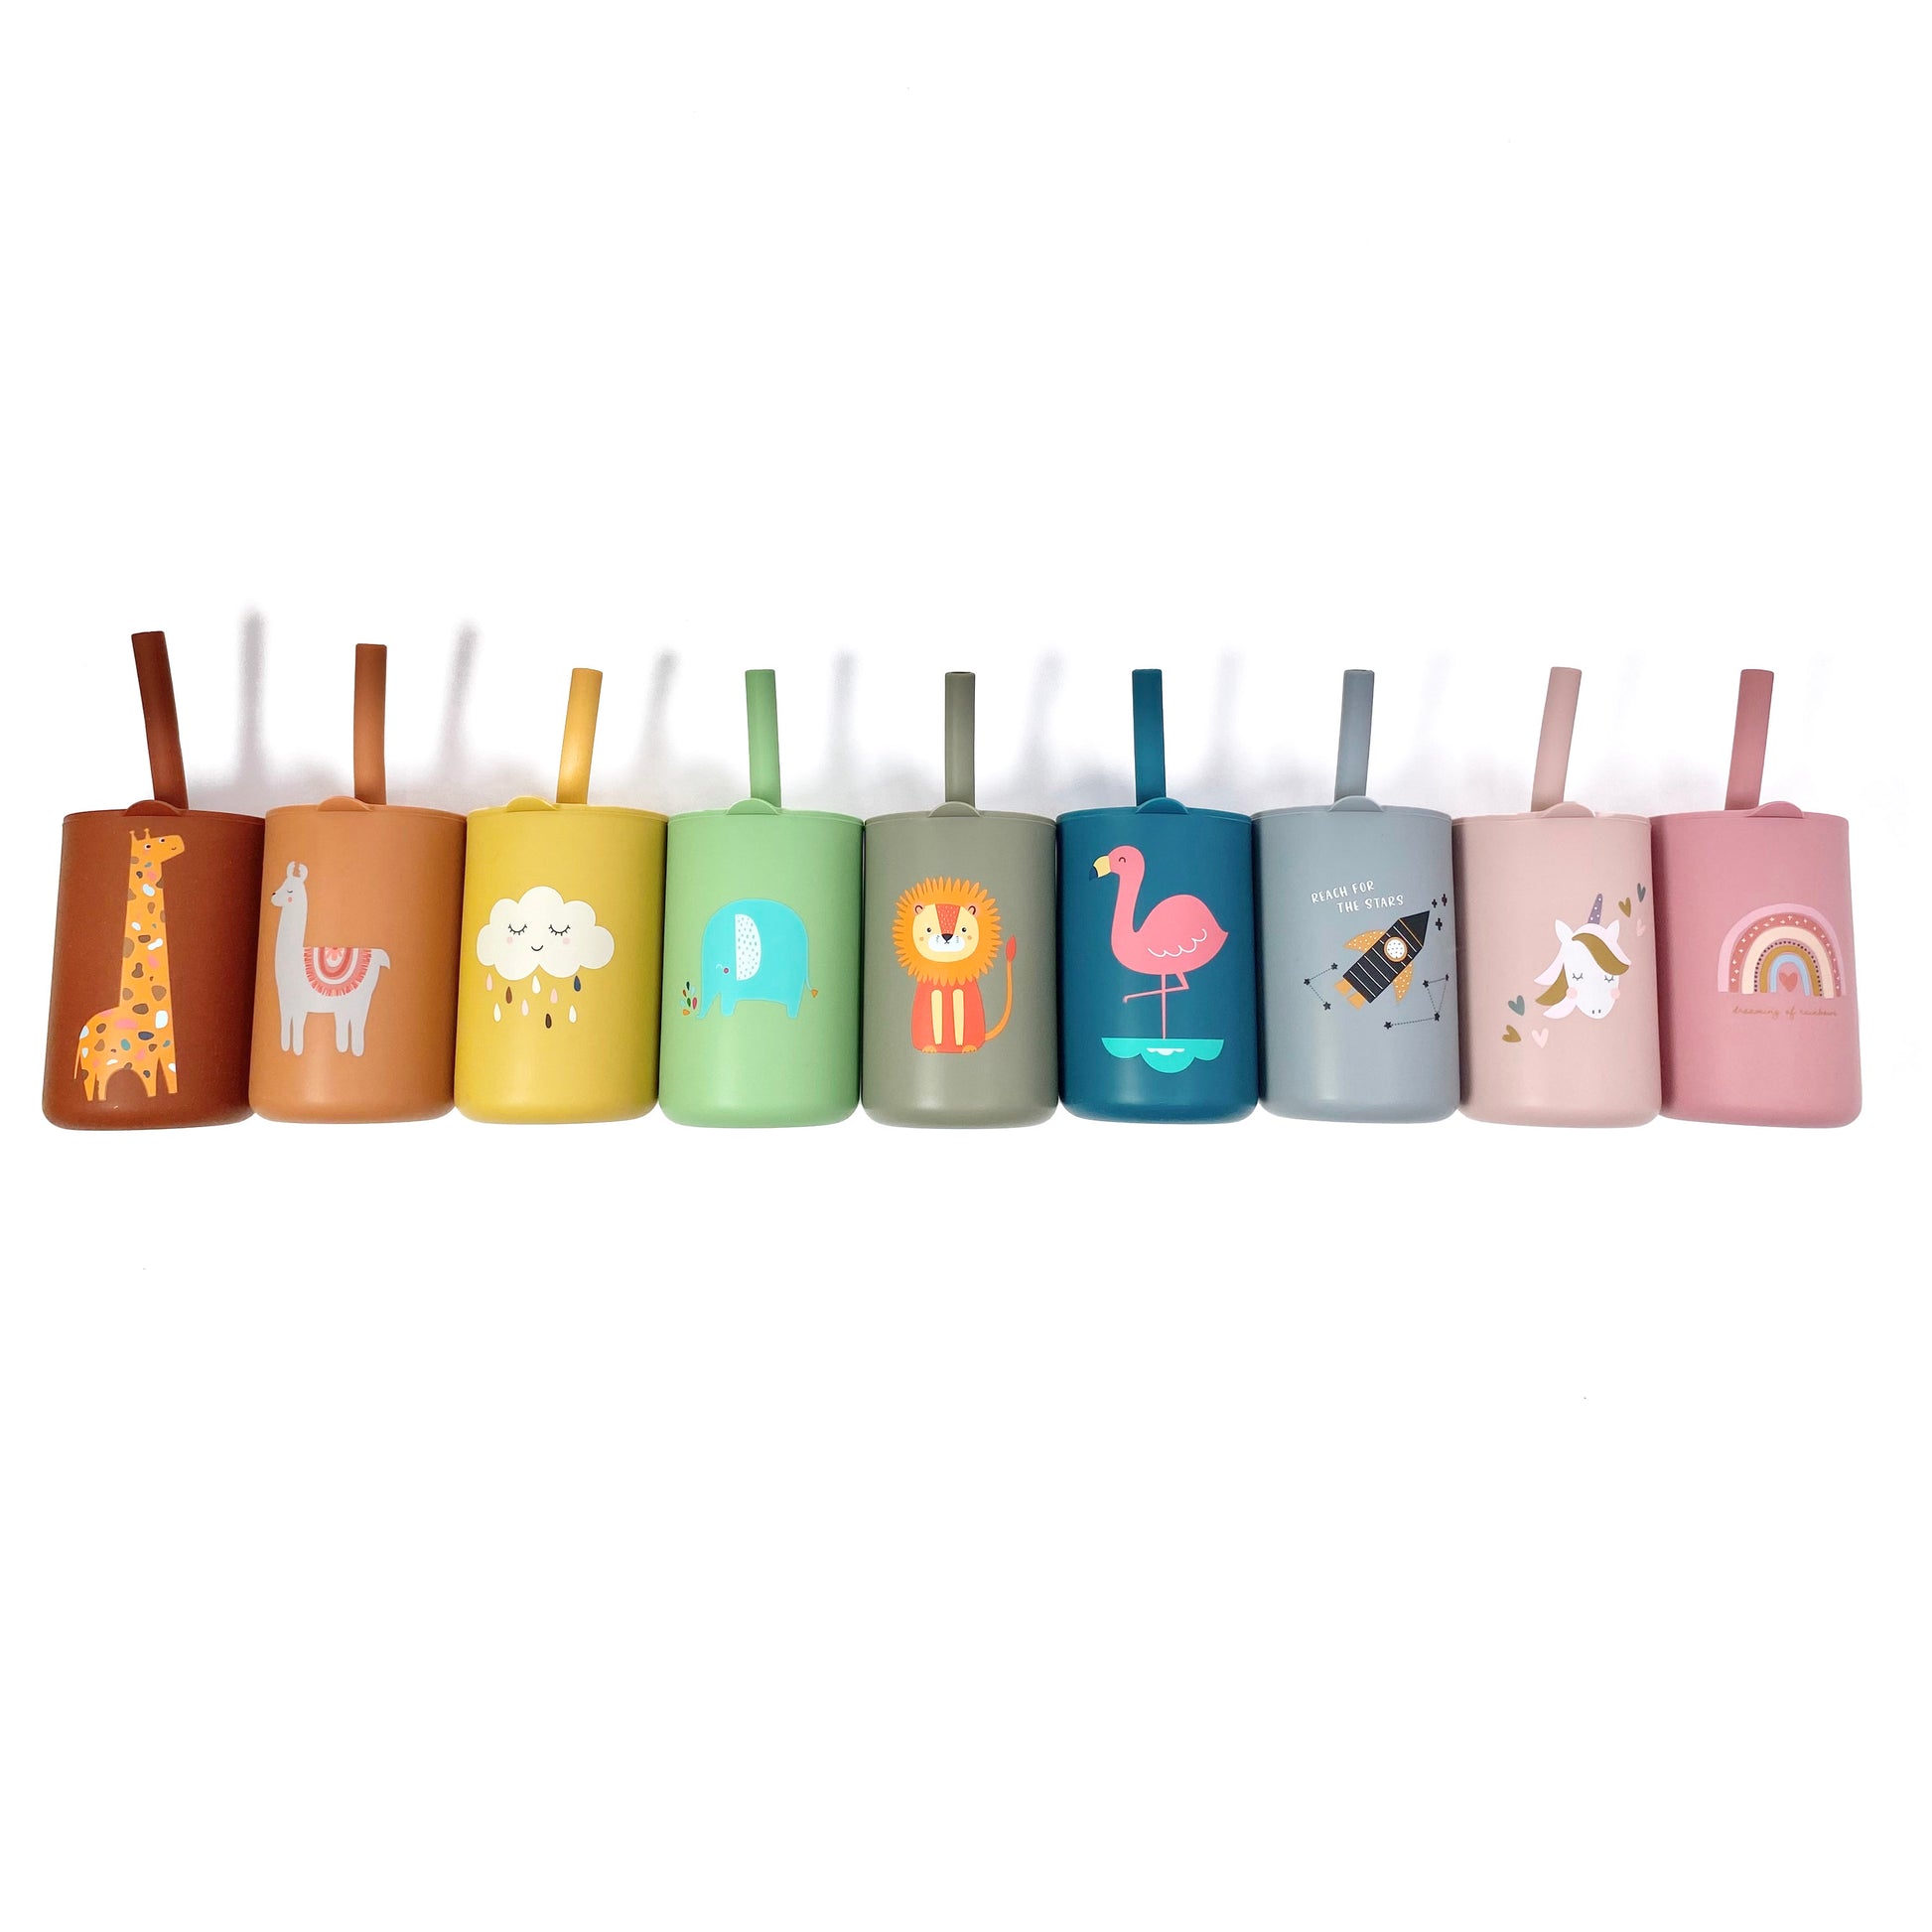 A collection of children’s silicone drinking cups with matching lids and straws, in various colours and designs, laid out in a line.